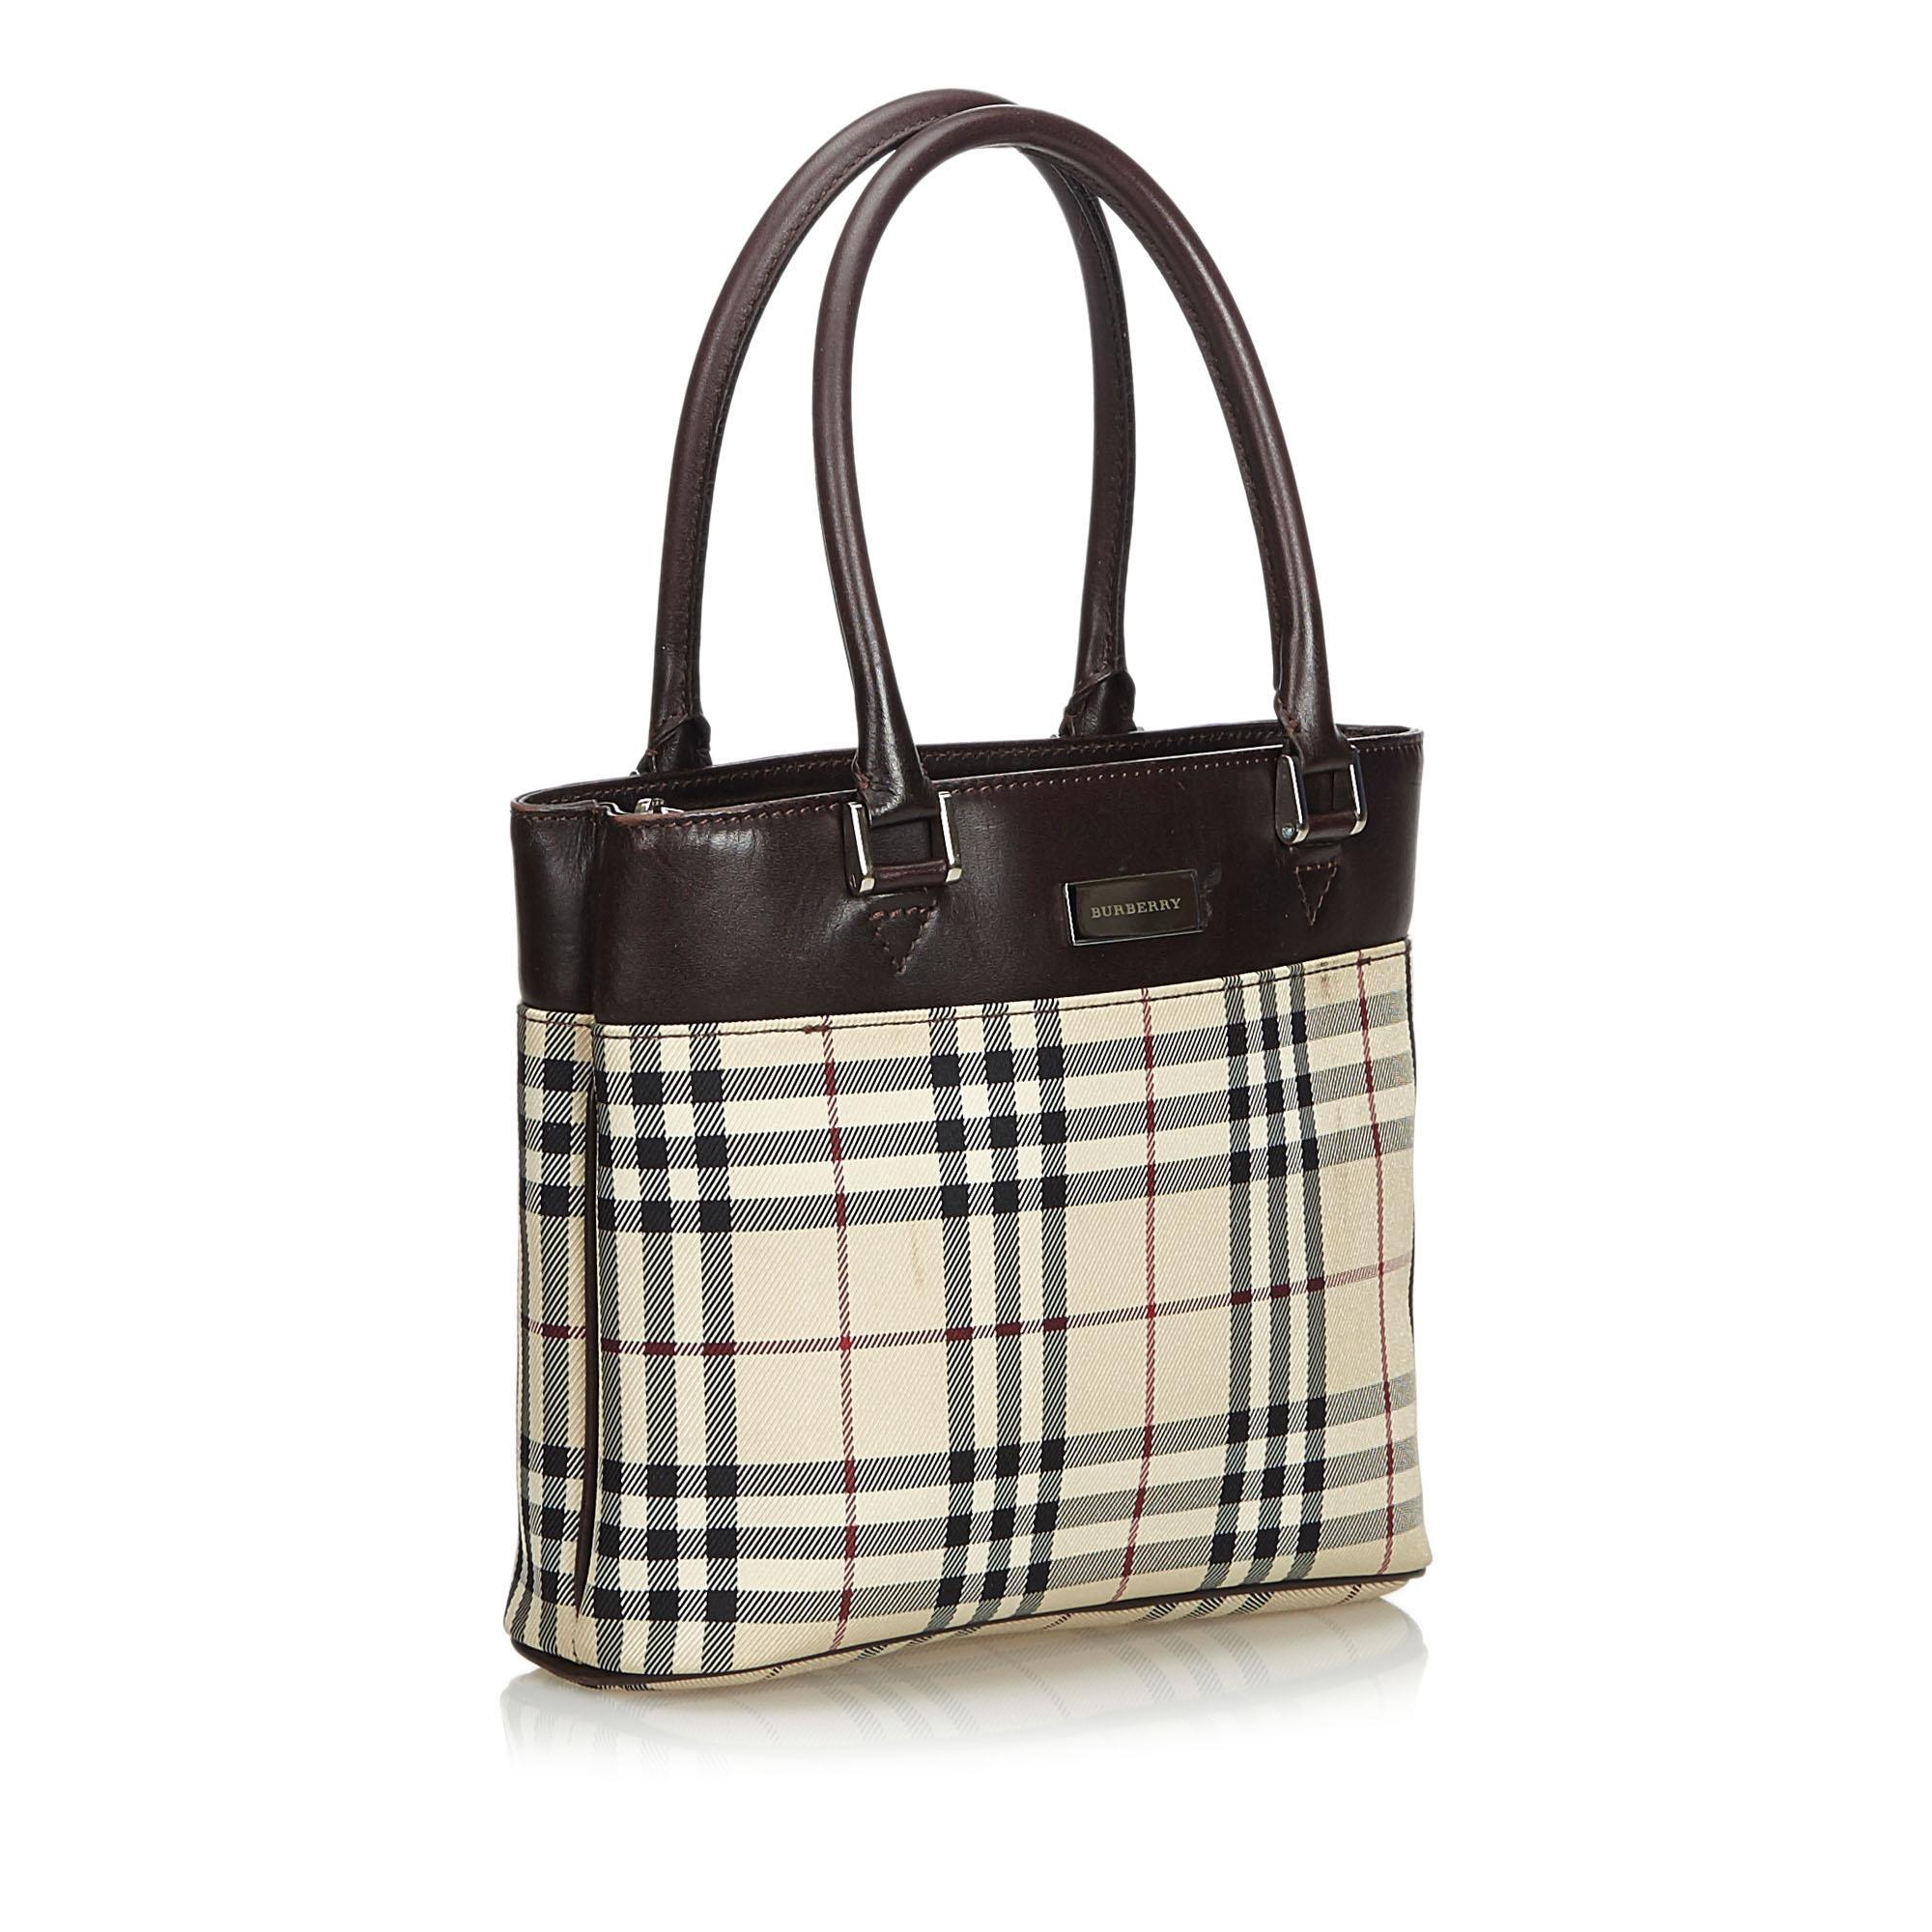 This handbag features a plaid jacquard body with leather trim, an external slip pocket, rolled leather handles, a top zip closure, and an interior pocket. It carries as B+ condition rating.

Inclusions: 
This item does not come with